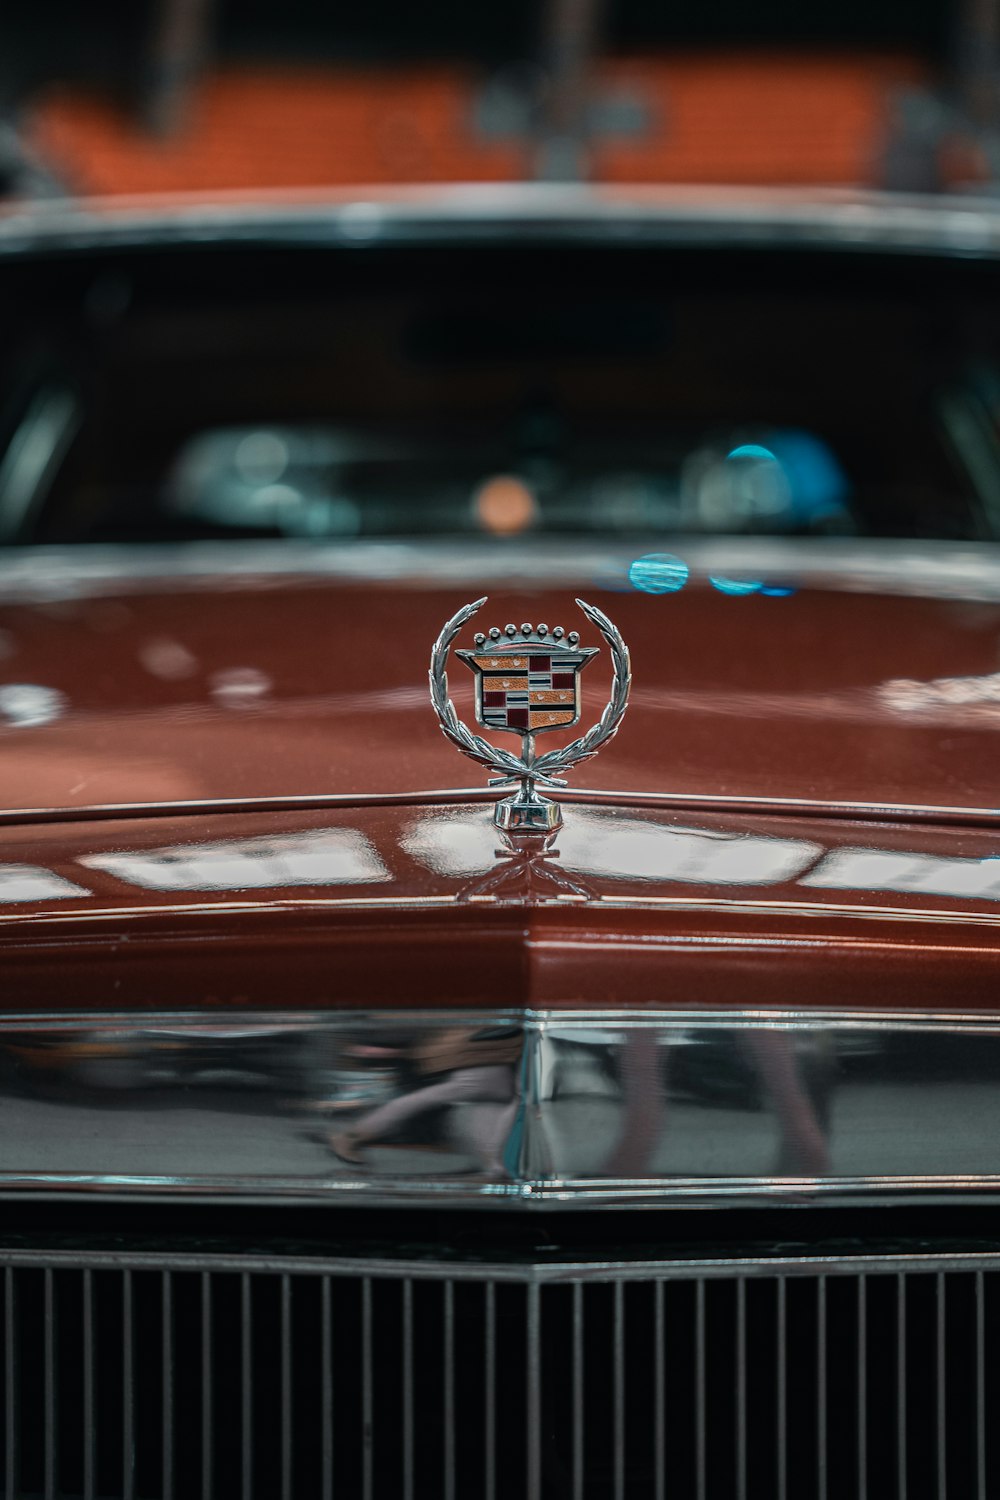 a close up of the front of a classic car